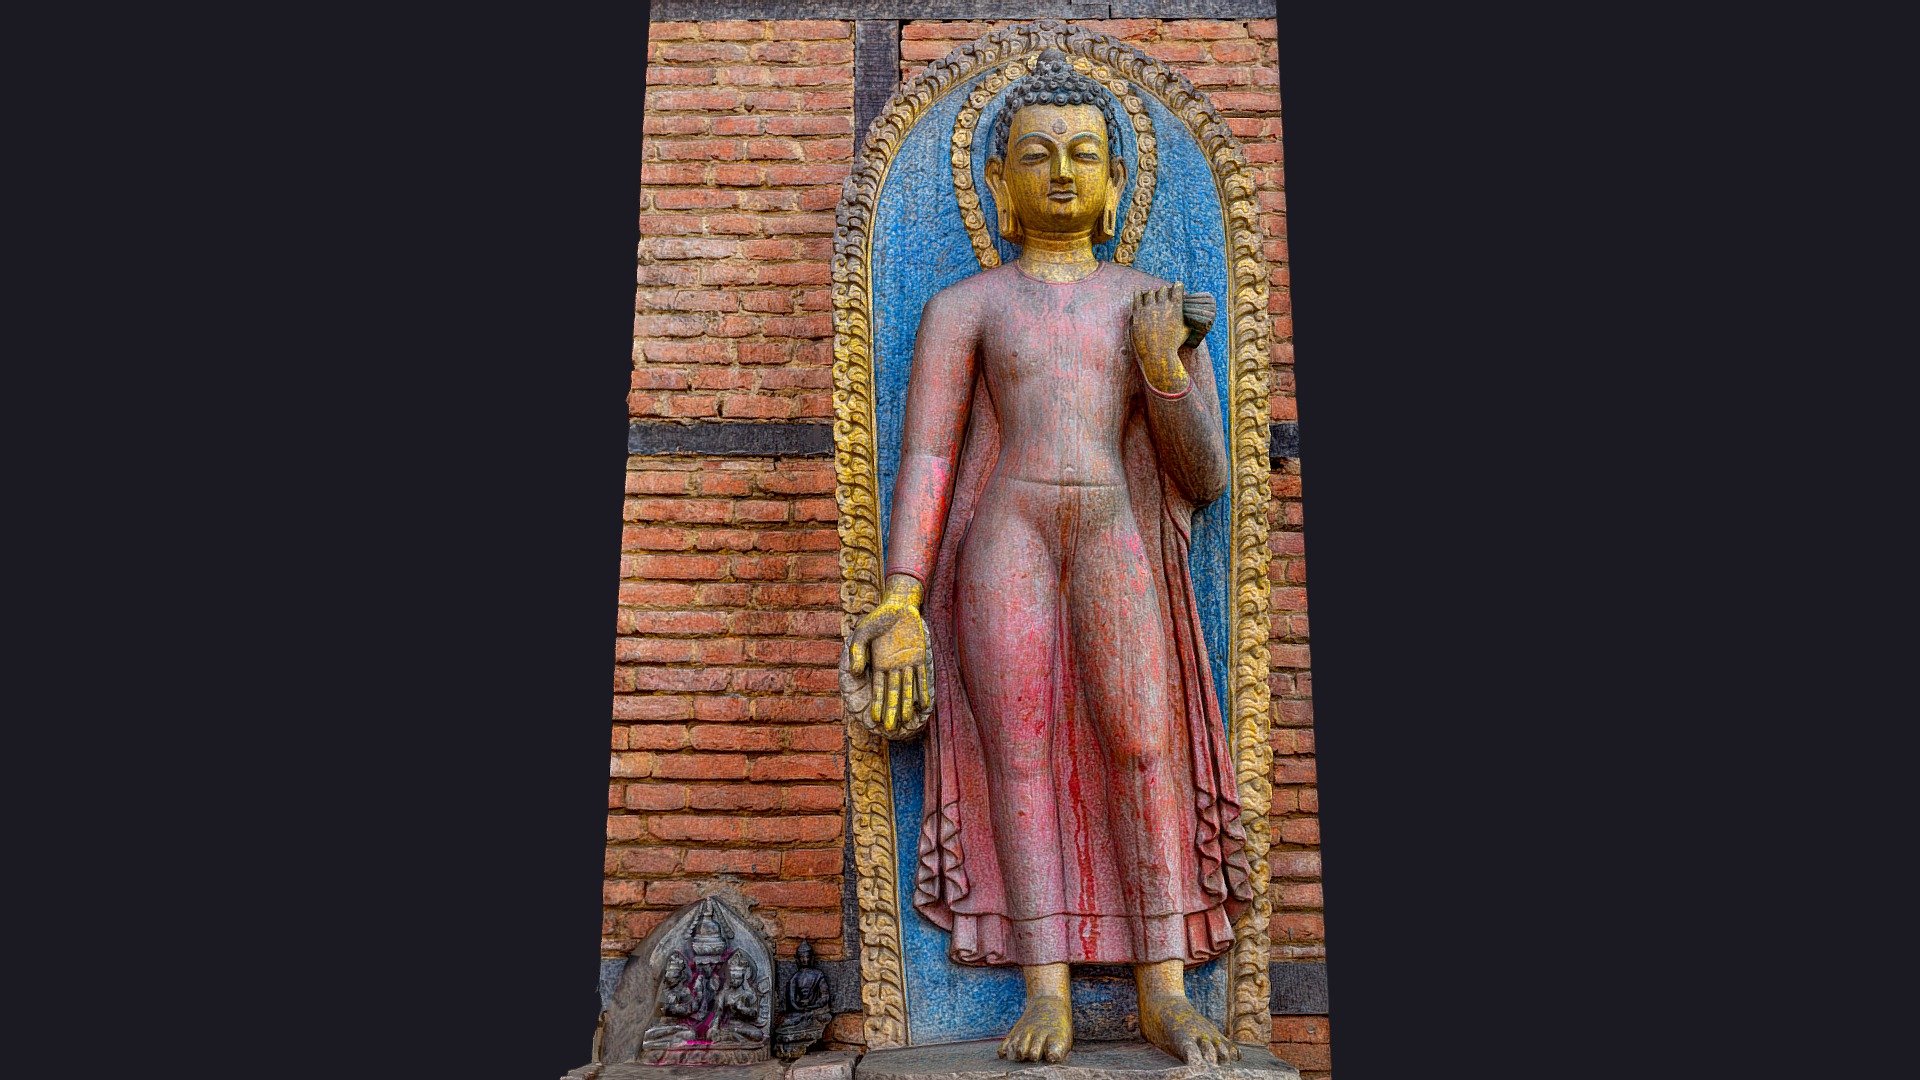 This sculpture of standing Buddha is located at swayambhunath temple in Kathmandu. 

Built in 15th century, placed at the front side of the hill, on the old route to the stupa. The word &ldquo;swayambhu